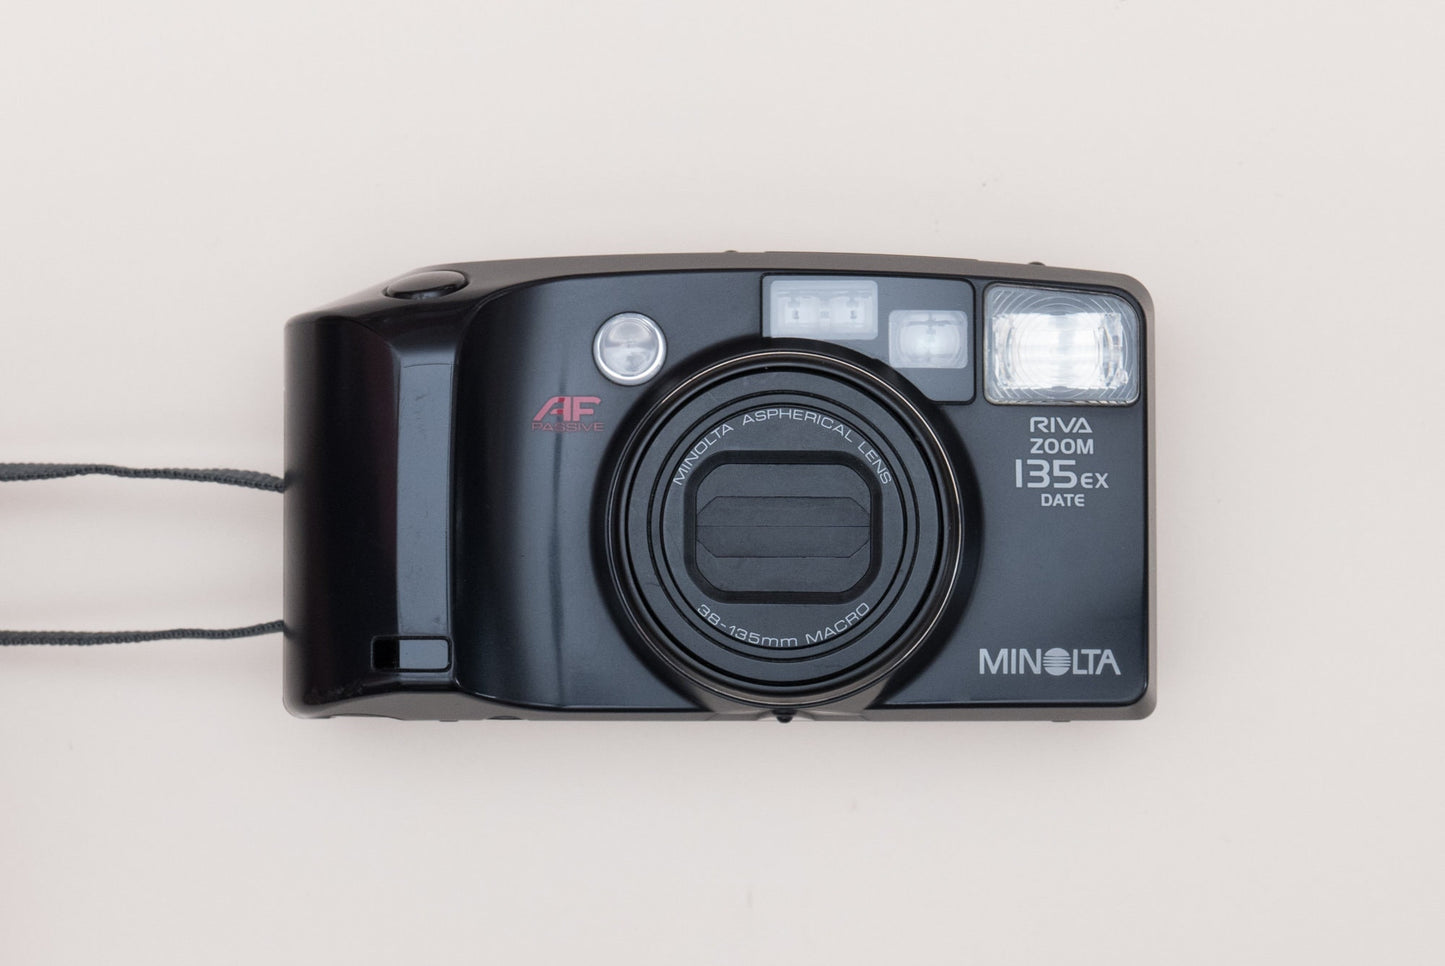 Minolta Riva Zoom 135EX Compact 35mm Point and Shoot Film Camera